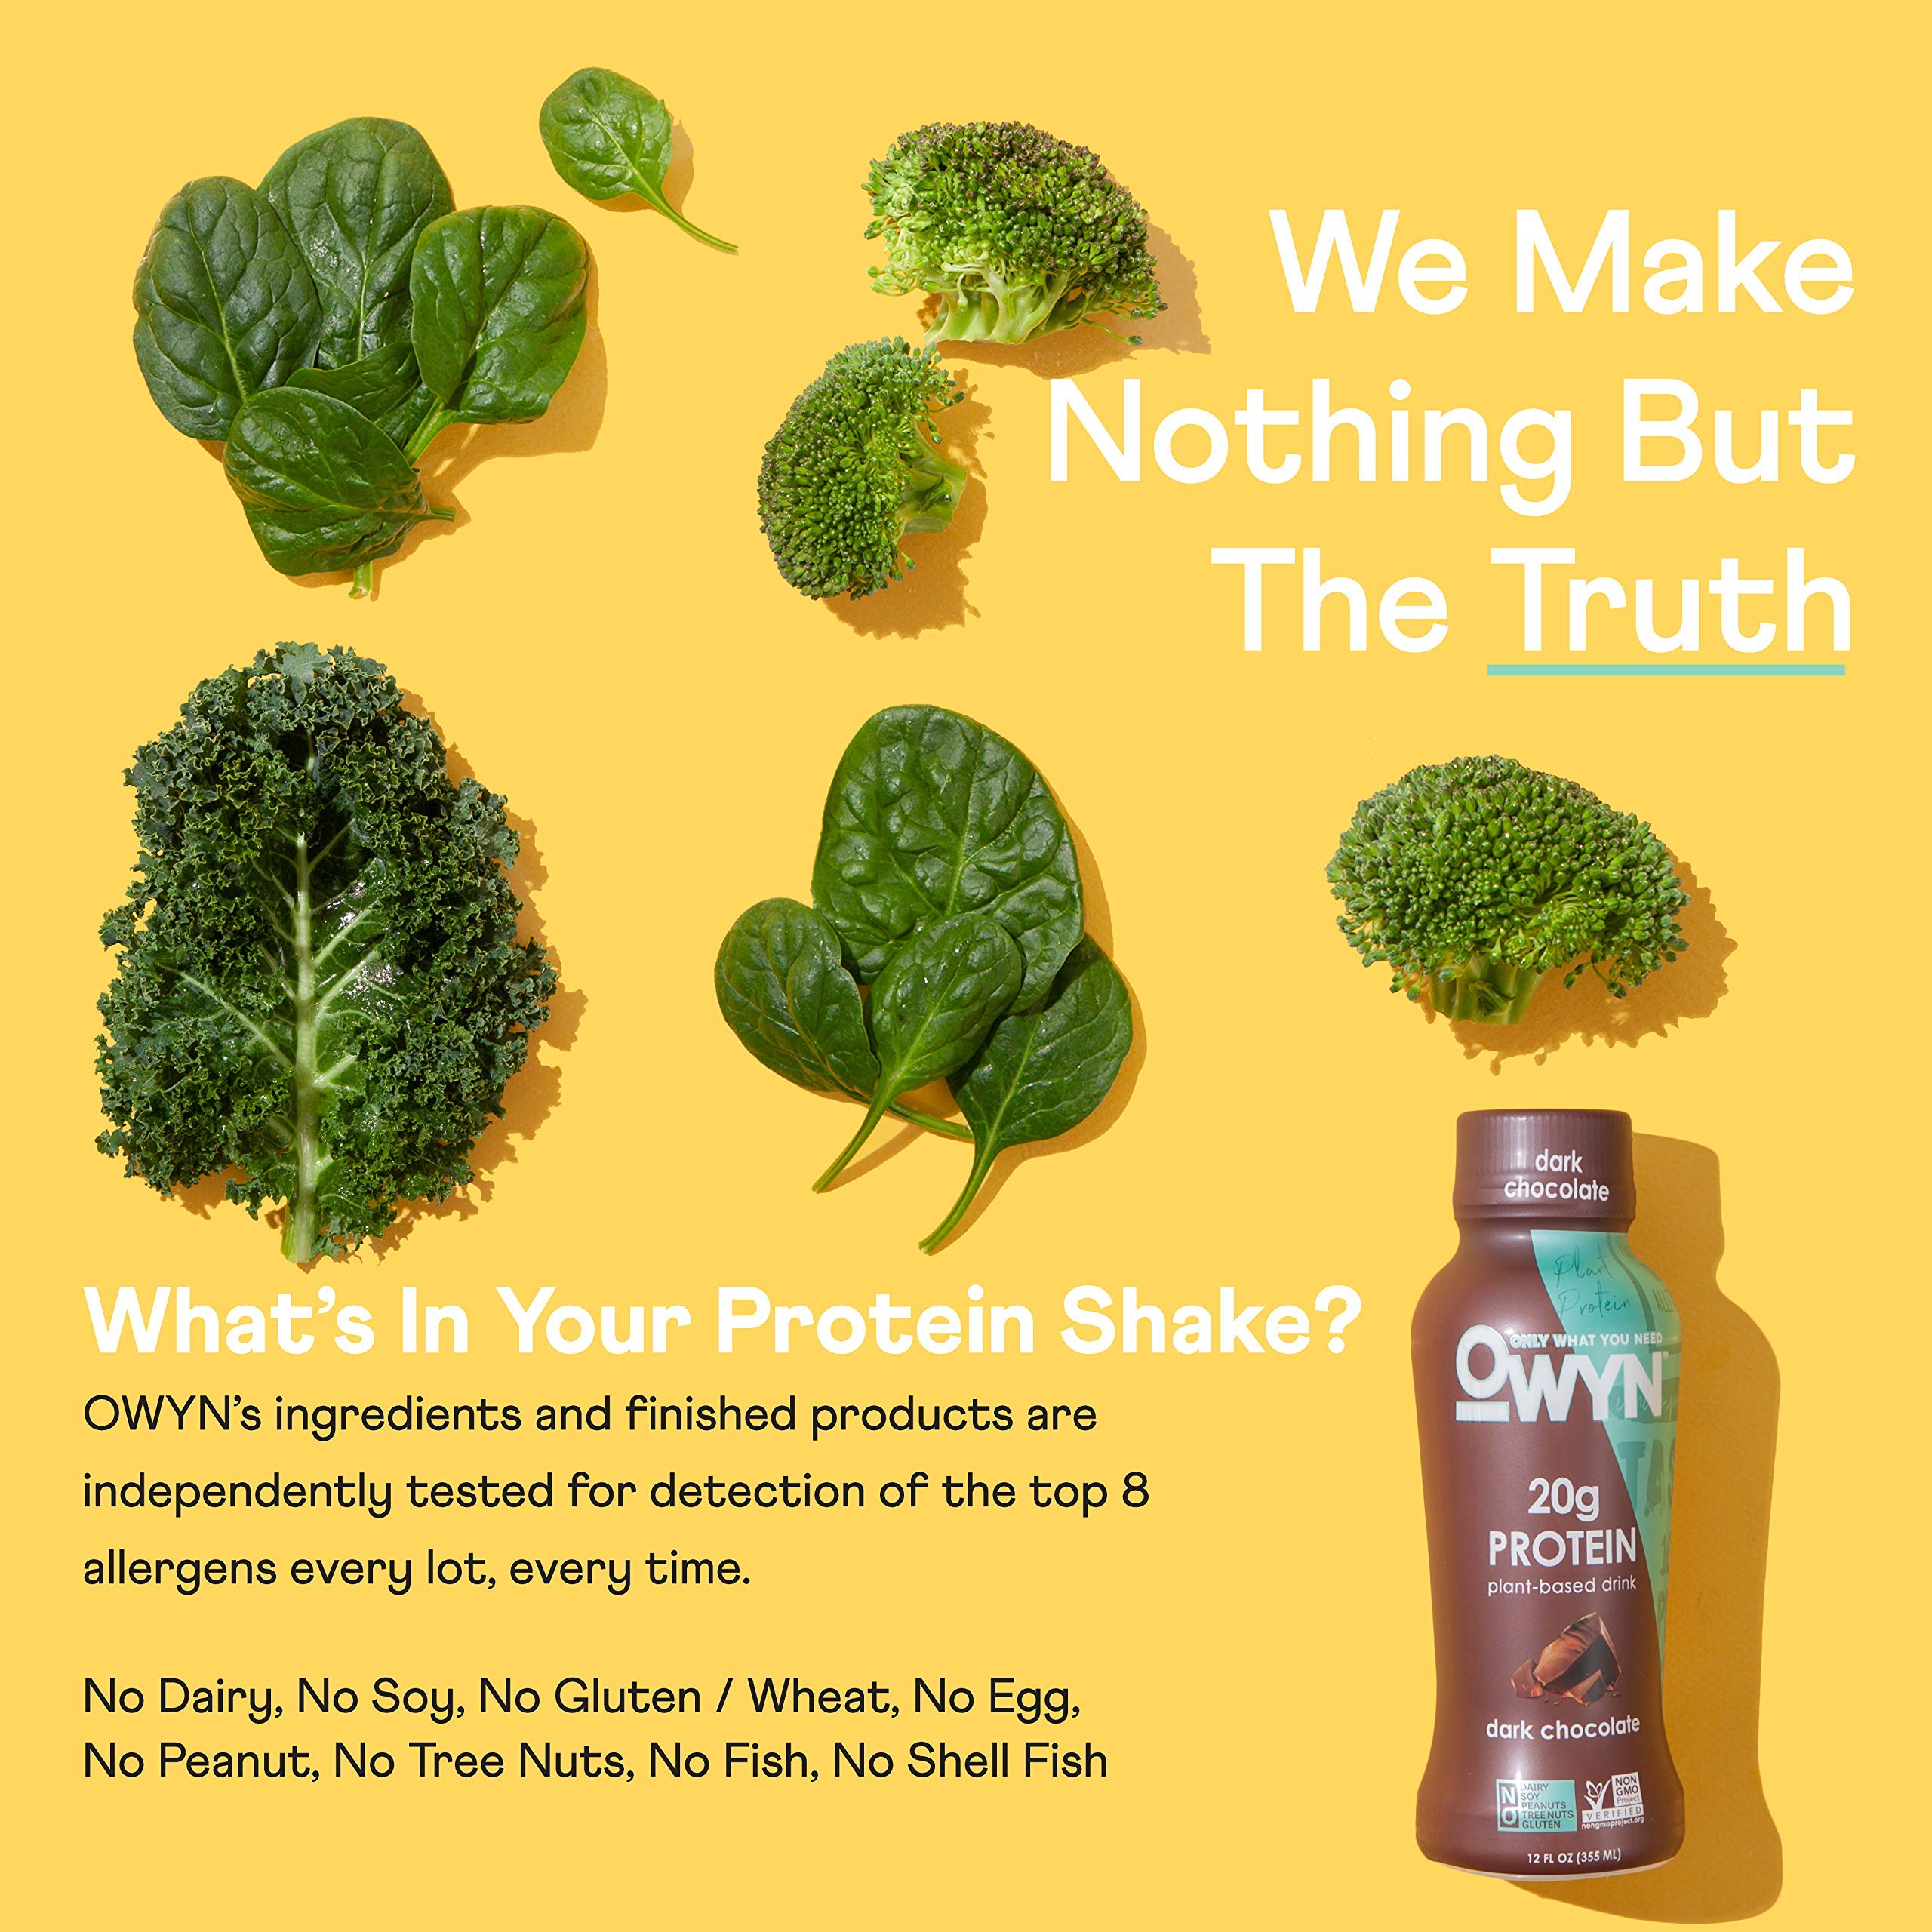 OWYN Plant Based Protein Shake, Dark Chocolate, with 20g Vegan Protein from Organic Pumpkin seed, Flax, Pea Blend, Omega-3, Prebiotic supplements and Superfoods Greens Blend for an all-in-one nutritional shake, Gluten and Soy-Free, Non-GMO (12 Pack)